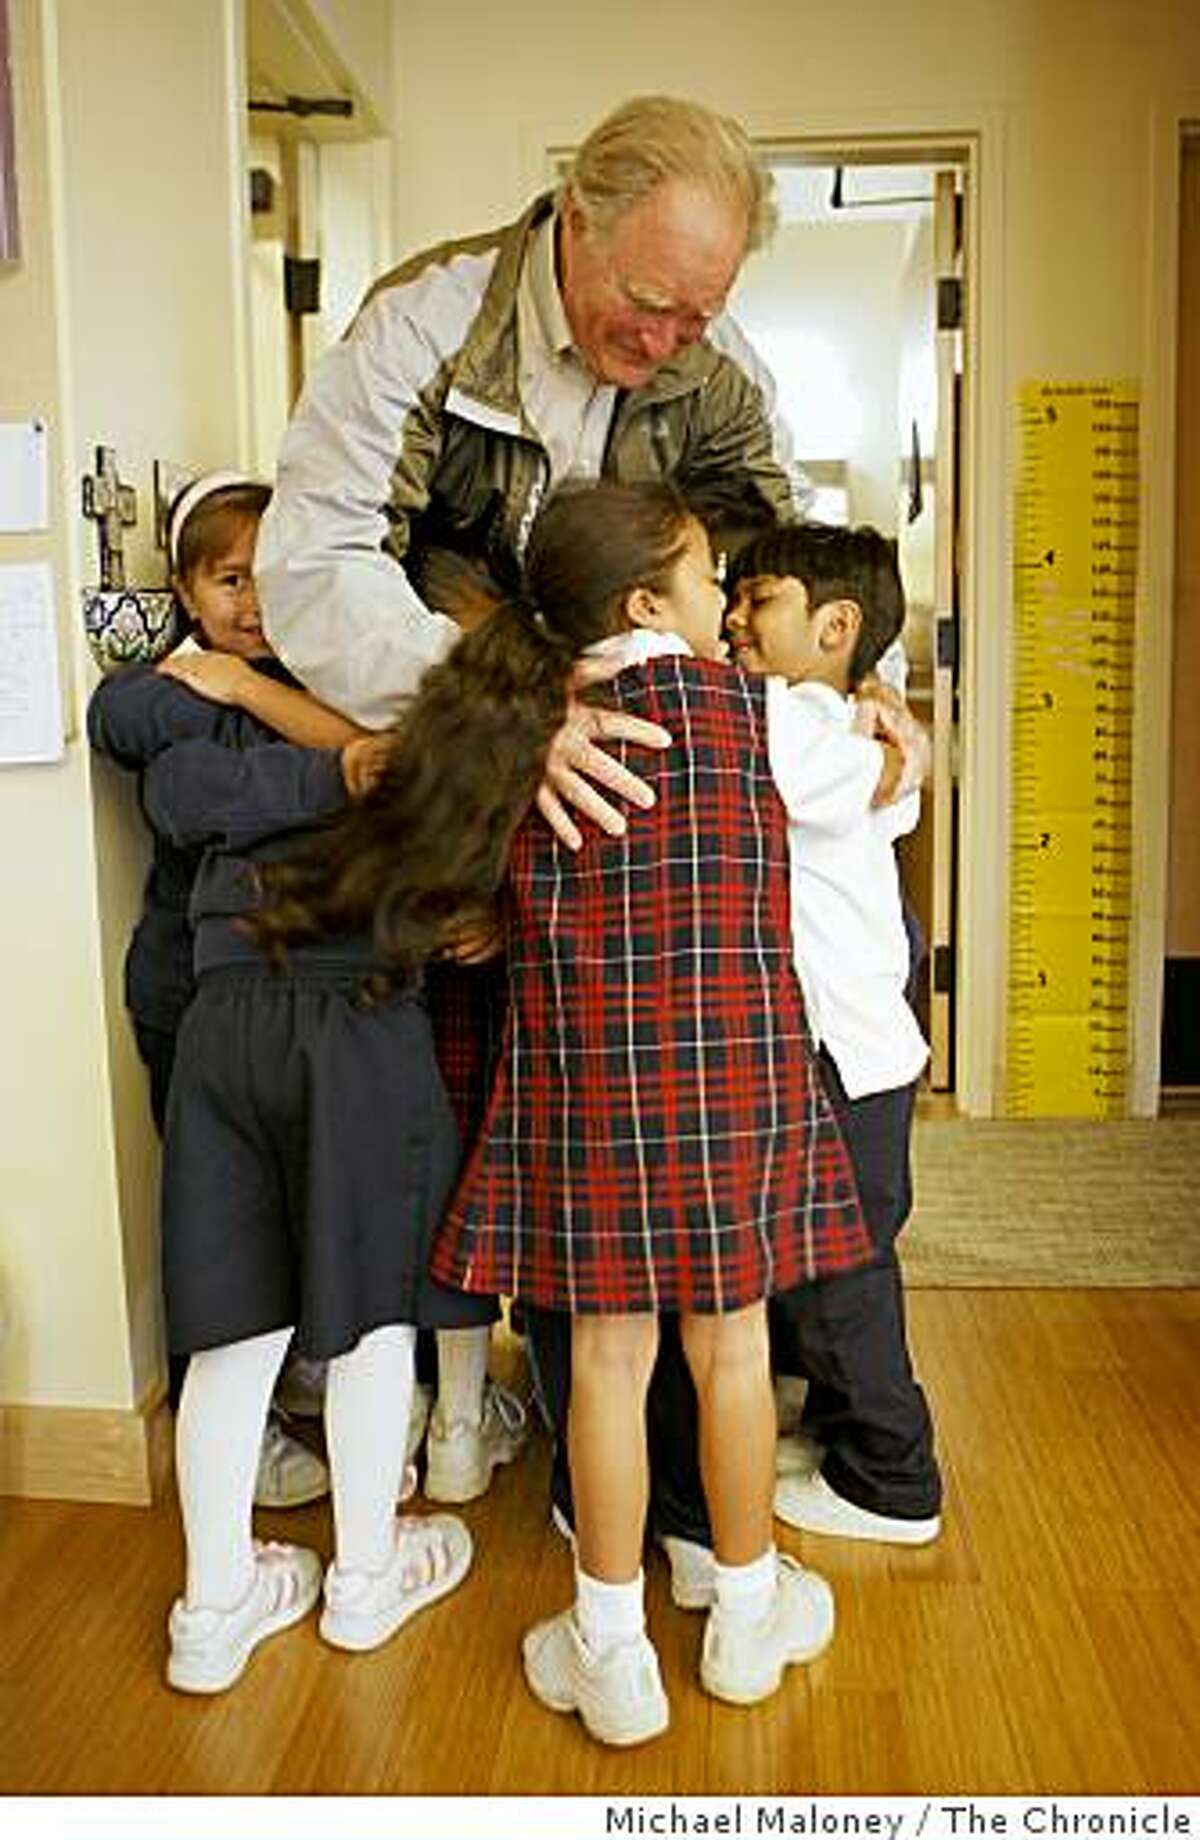 Philanthropist Bill Somerville gets a hug from the Holy Family School students at the St. Francis Center in Redwood City, Calif., on November 19, 2008 - one of the many organizations he has helped out. The first graders all ran to him yelling "Mr. Bill!" on his visit to the class.